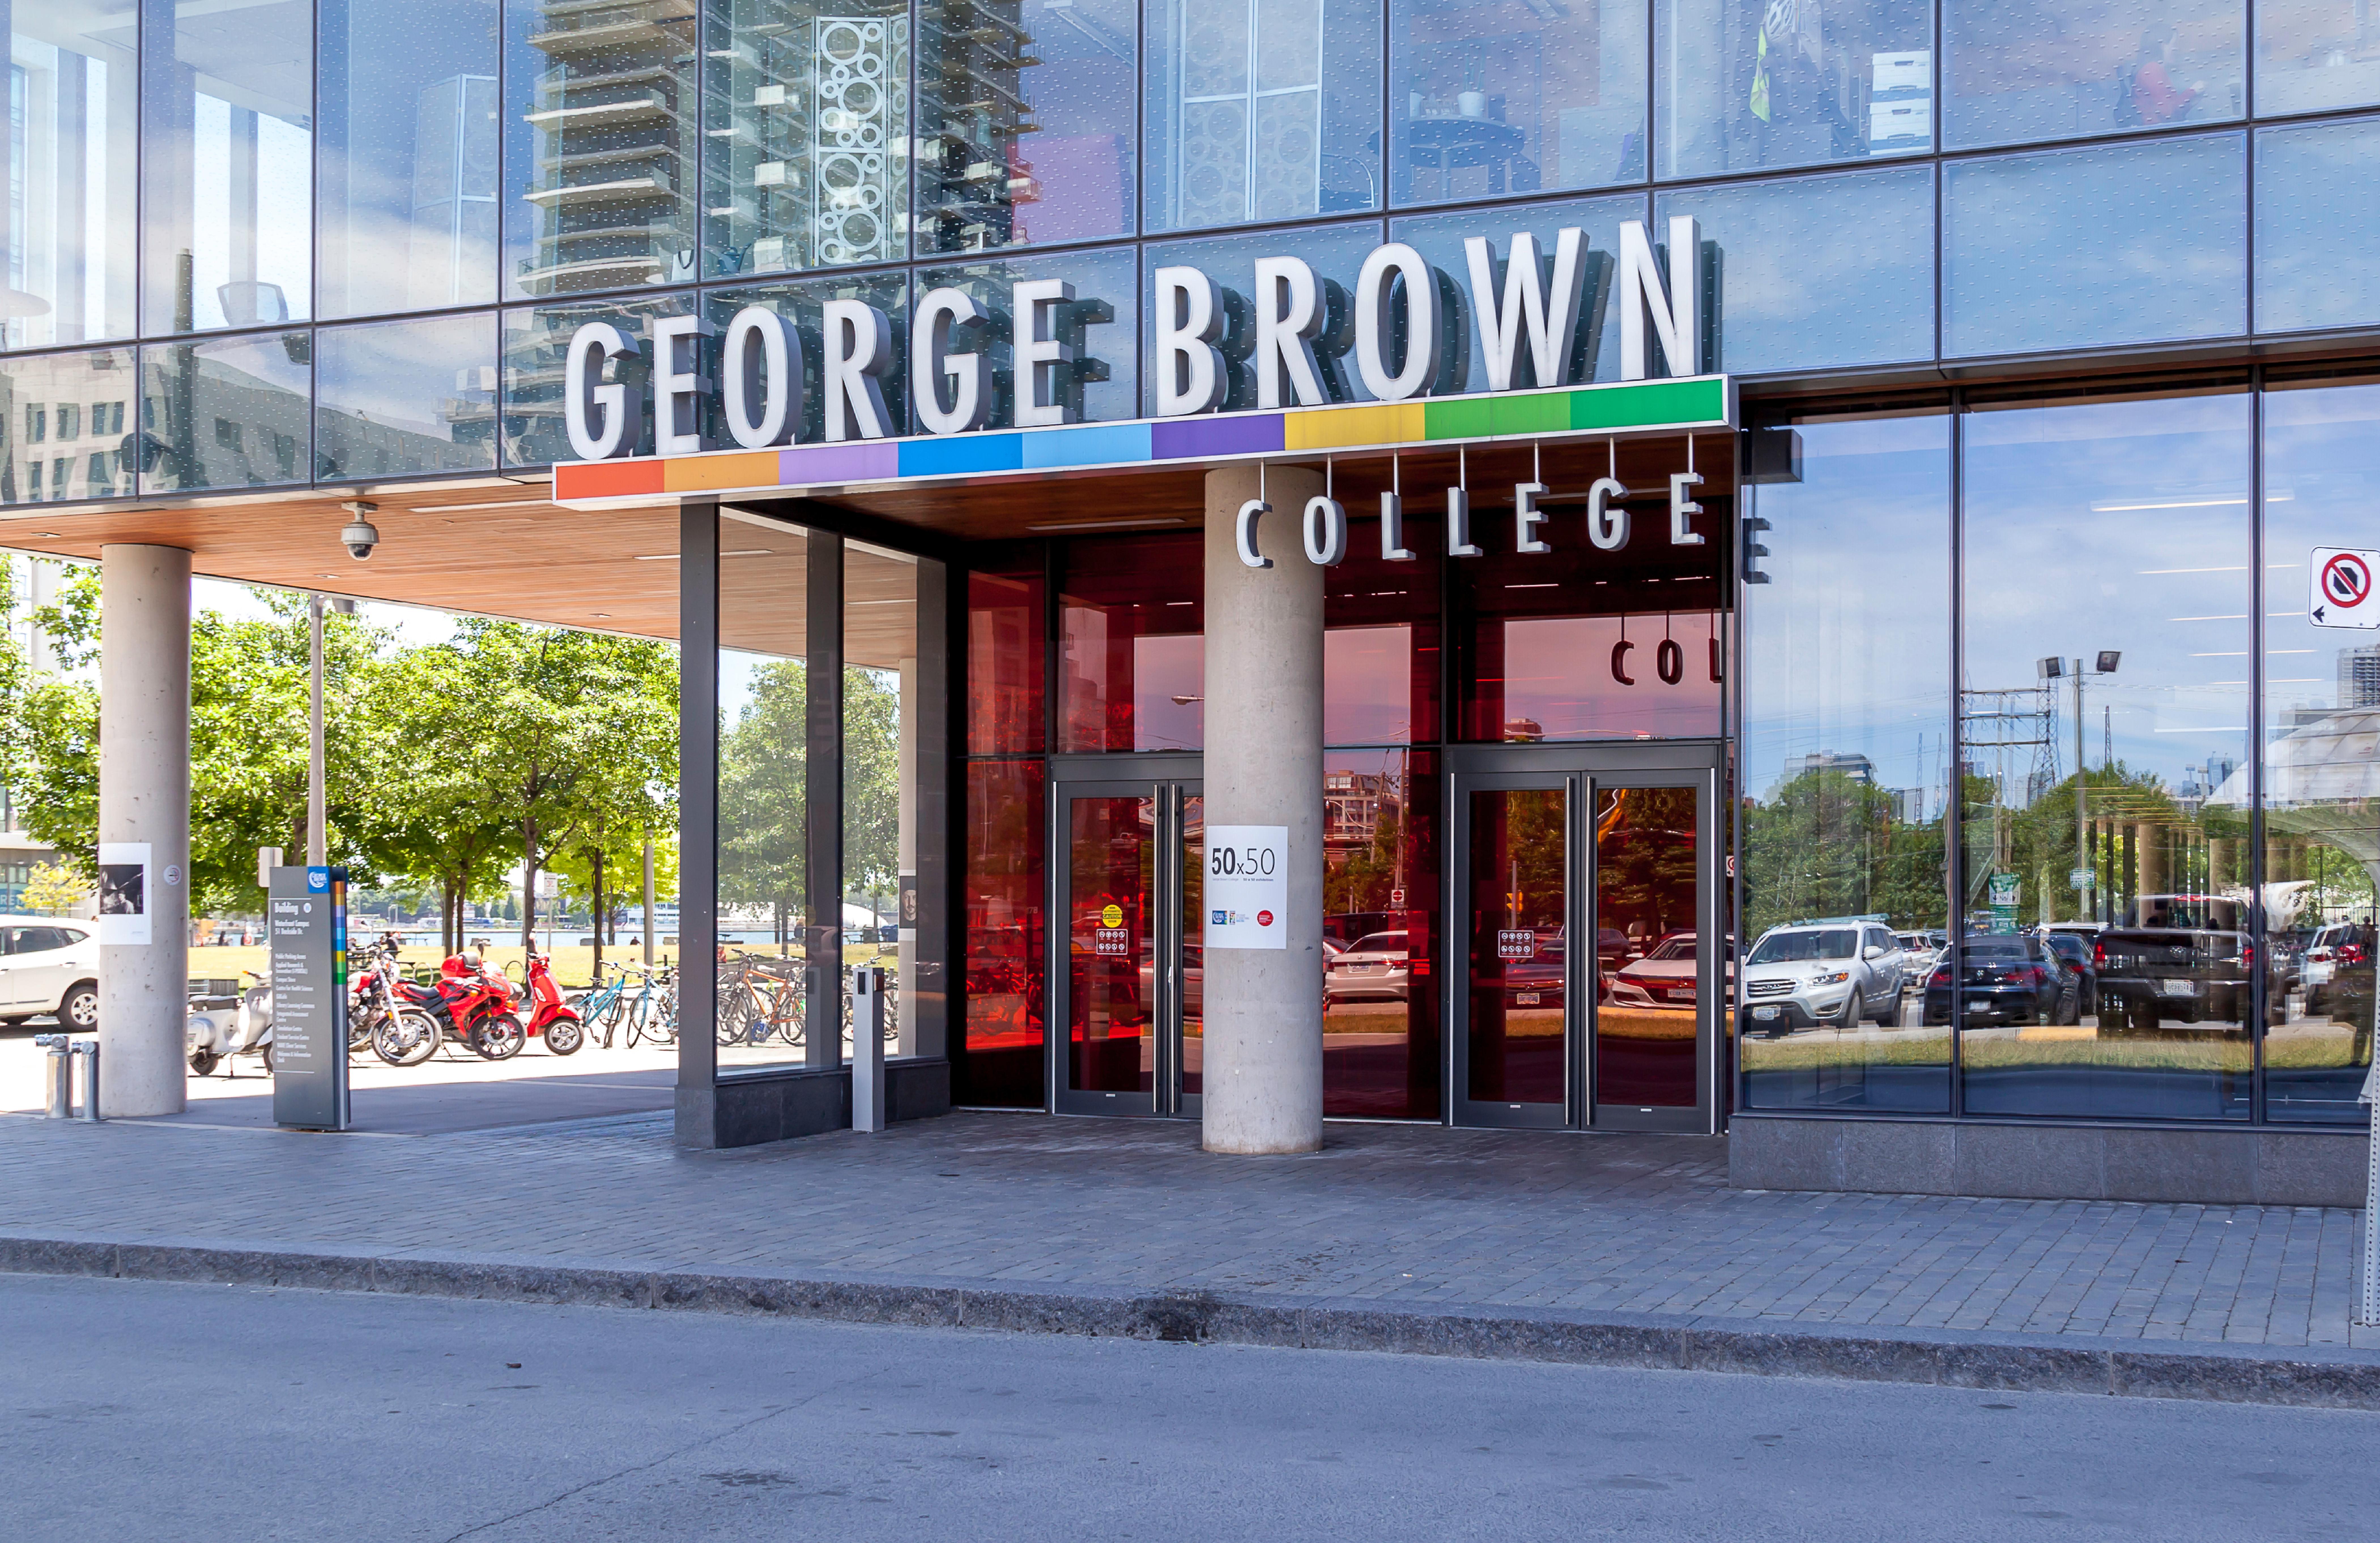 Entrance to a building with a colorful George Brown College sign